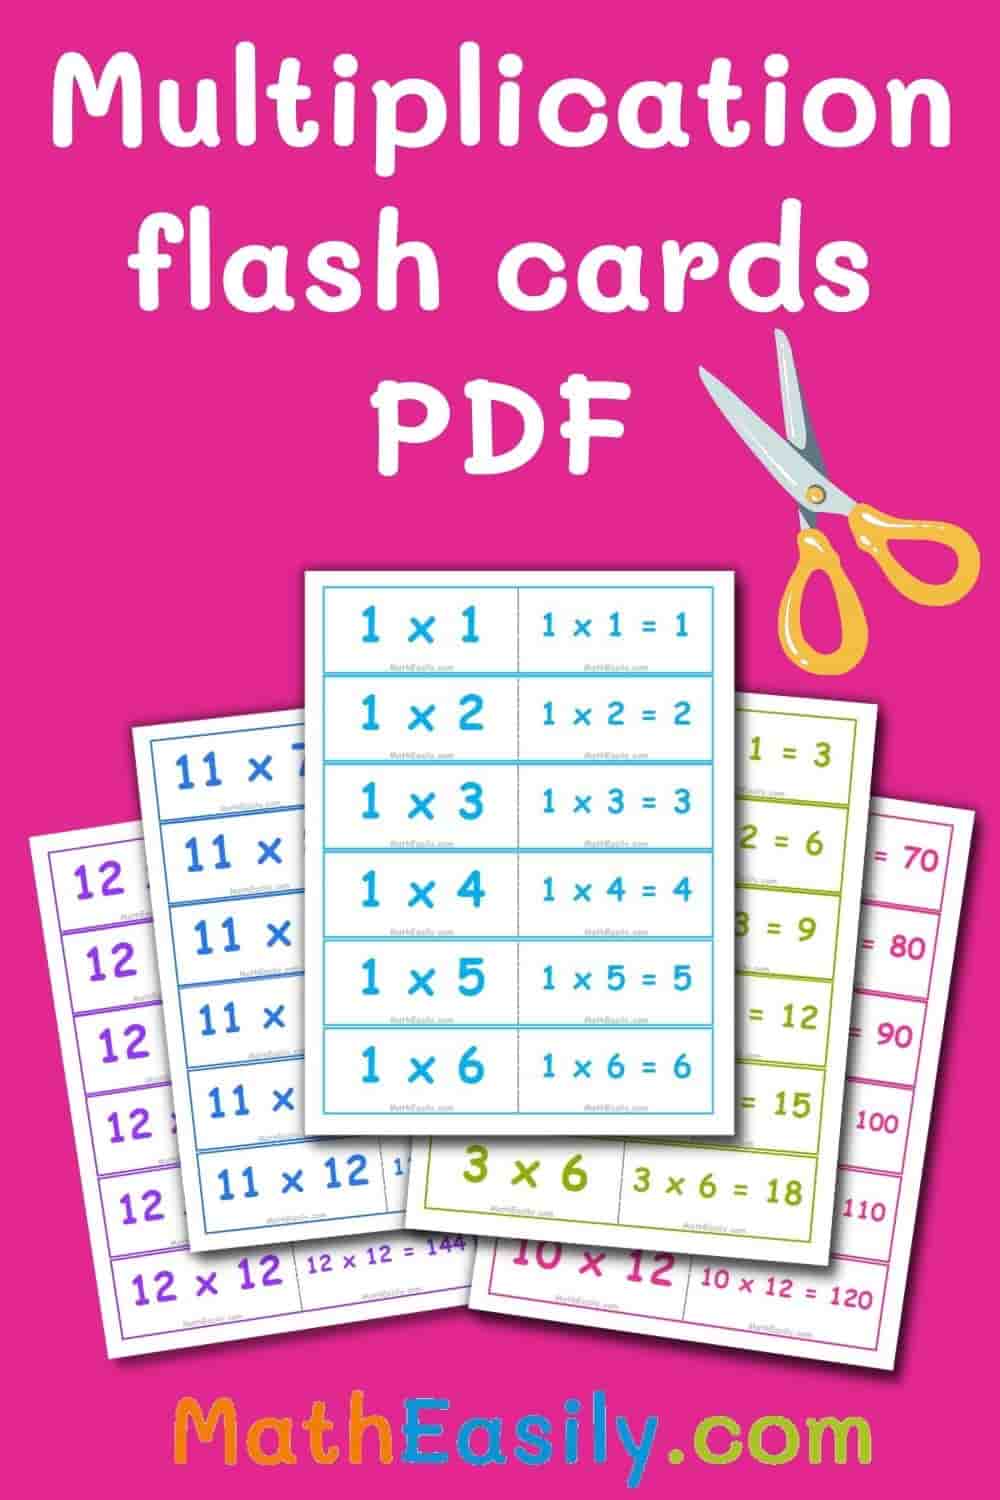 Times Table Flashcards space astronauts characters 12 Cards FREE DELIVERY 